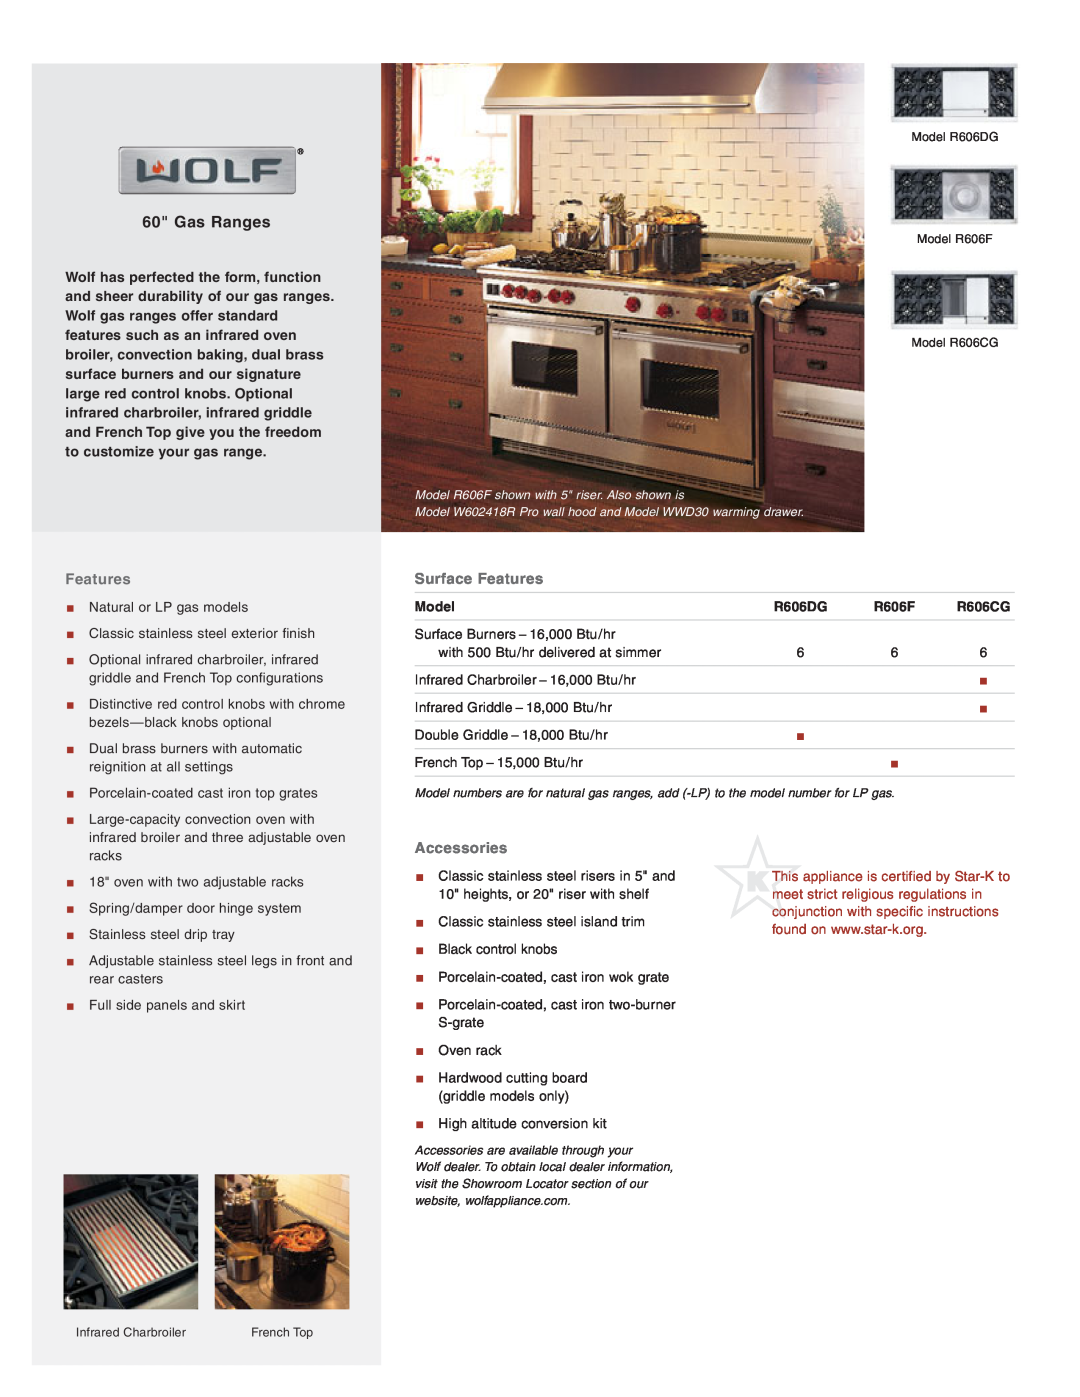 Wolf R606F manual Gas Ranges, Surface Features, Accessories, Model, R606DG, R606CG 